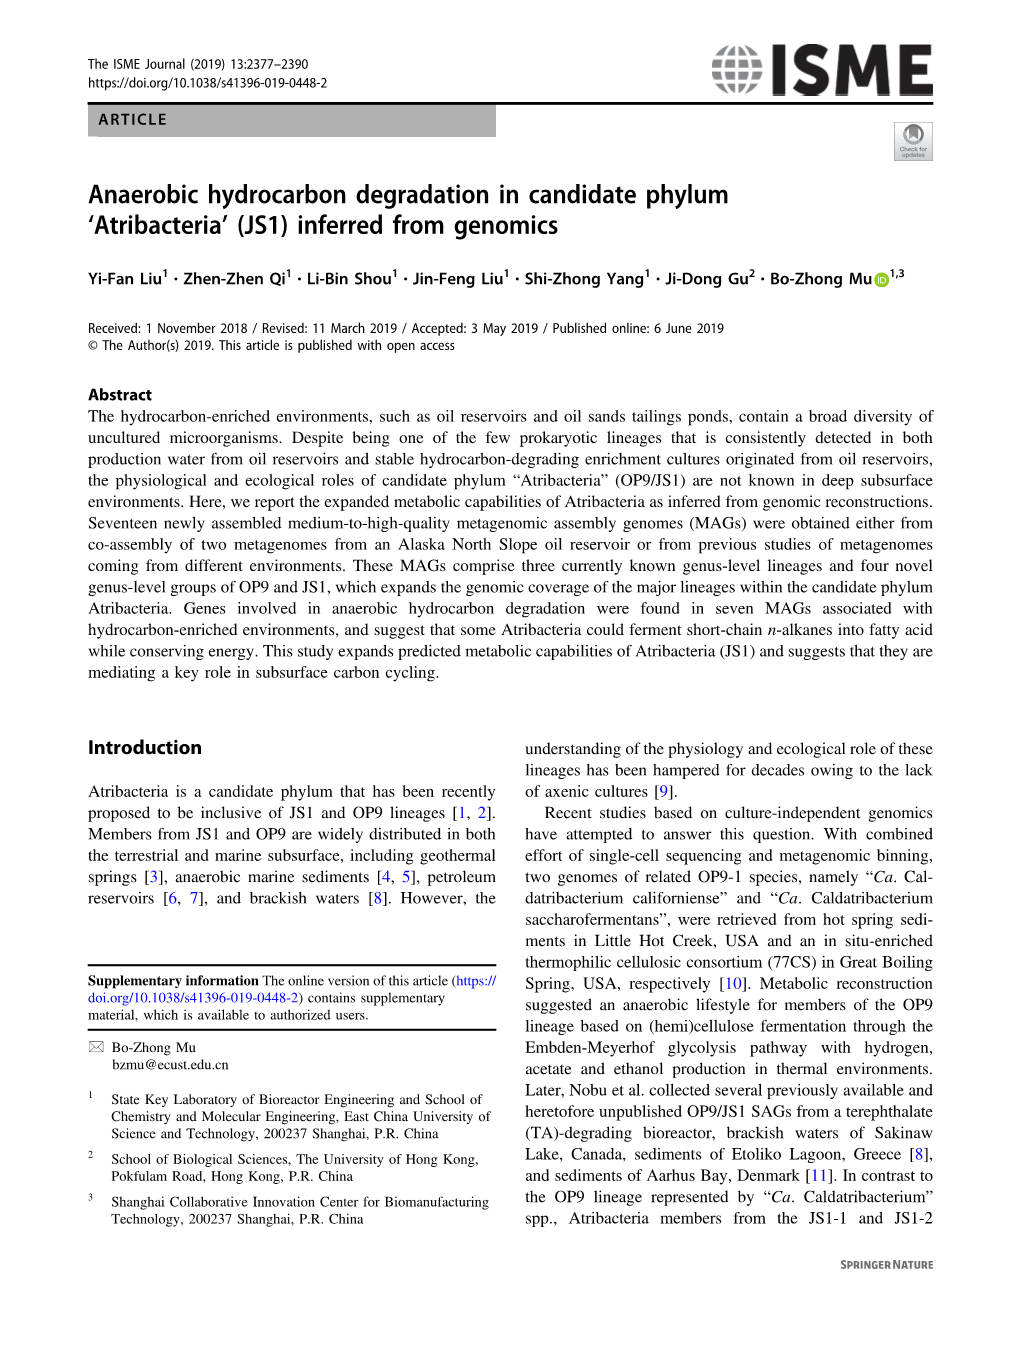 Anaerobic Hydrocarbon Degradation in Candidate Phylum 'Atribacteria' (JS1) Inferred from Genomics